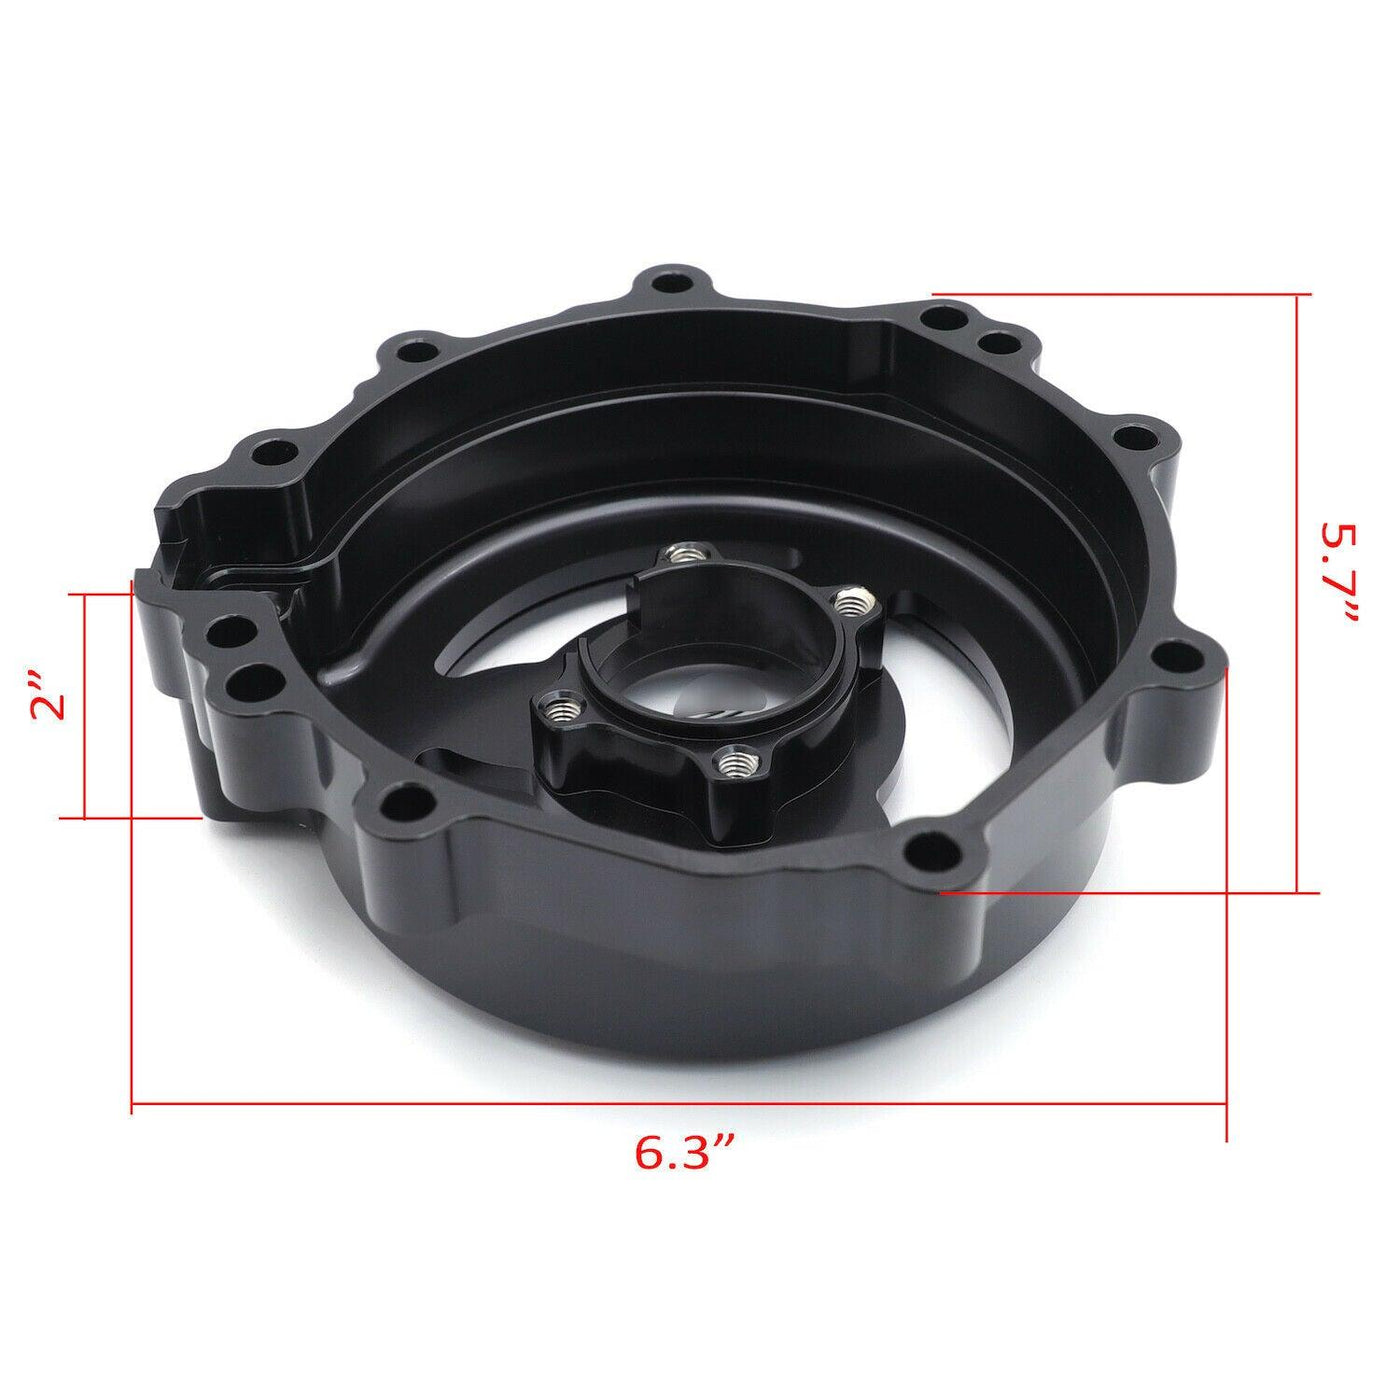 Black Clear Engine Stator Cover Crankcase Left For 2009-2021 Kawasaki ZX-6R Ninj - Moto Life Products